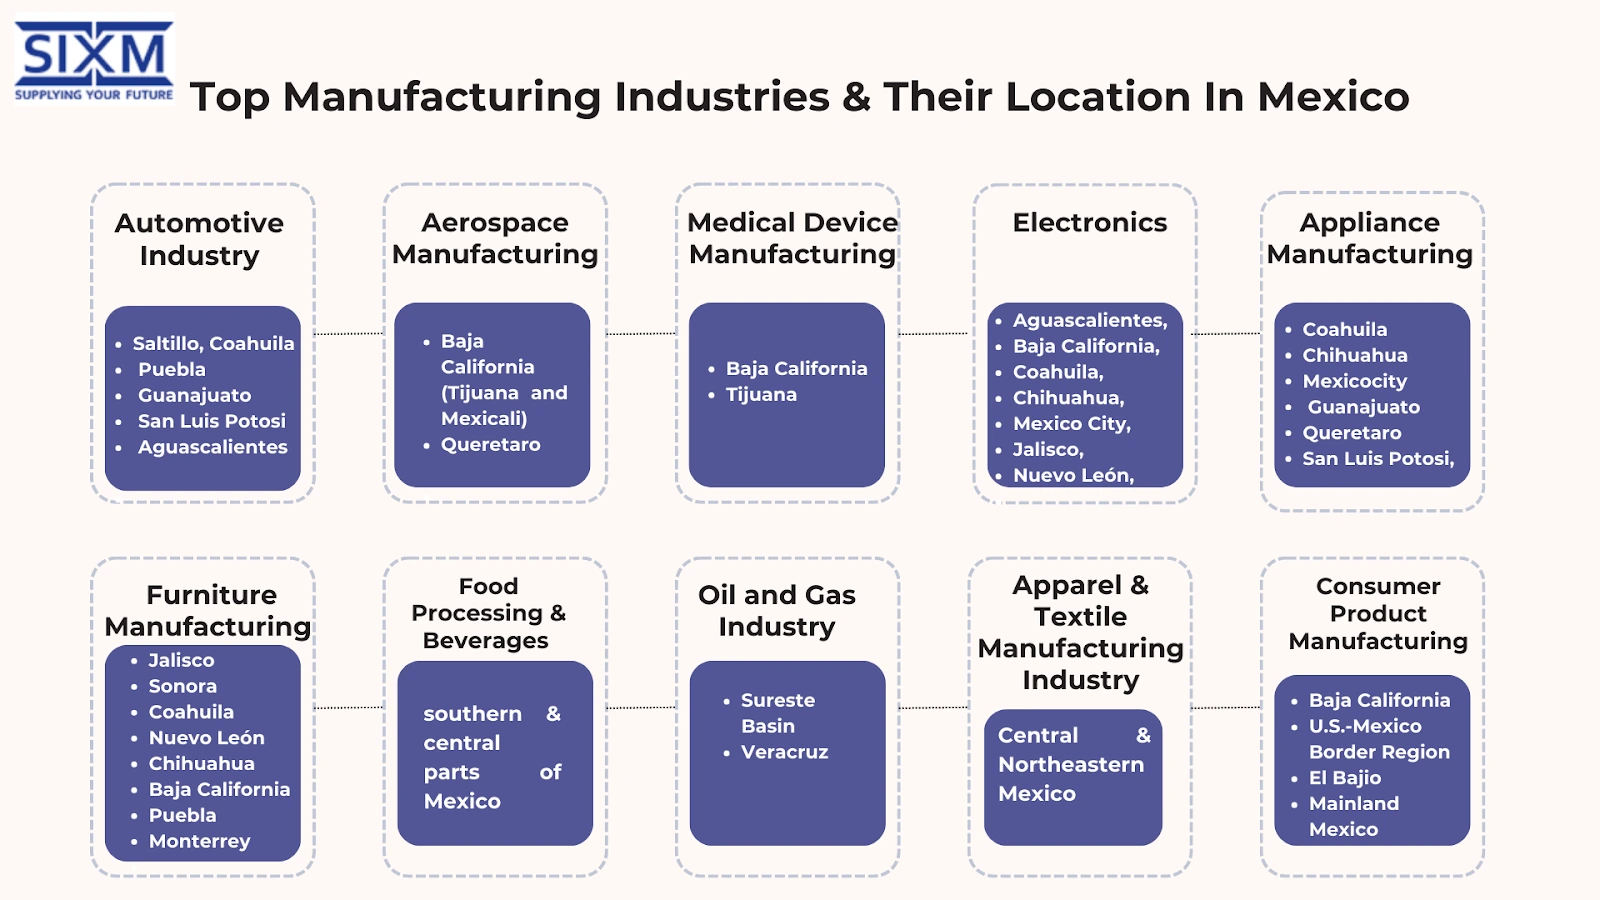 Top Manufacturing industries in Mexico